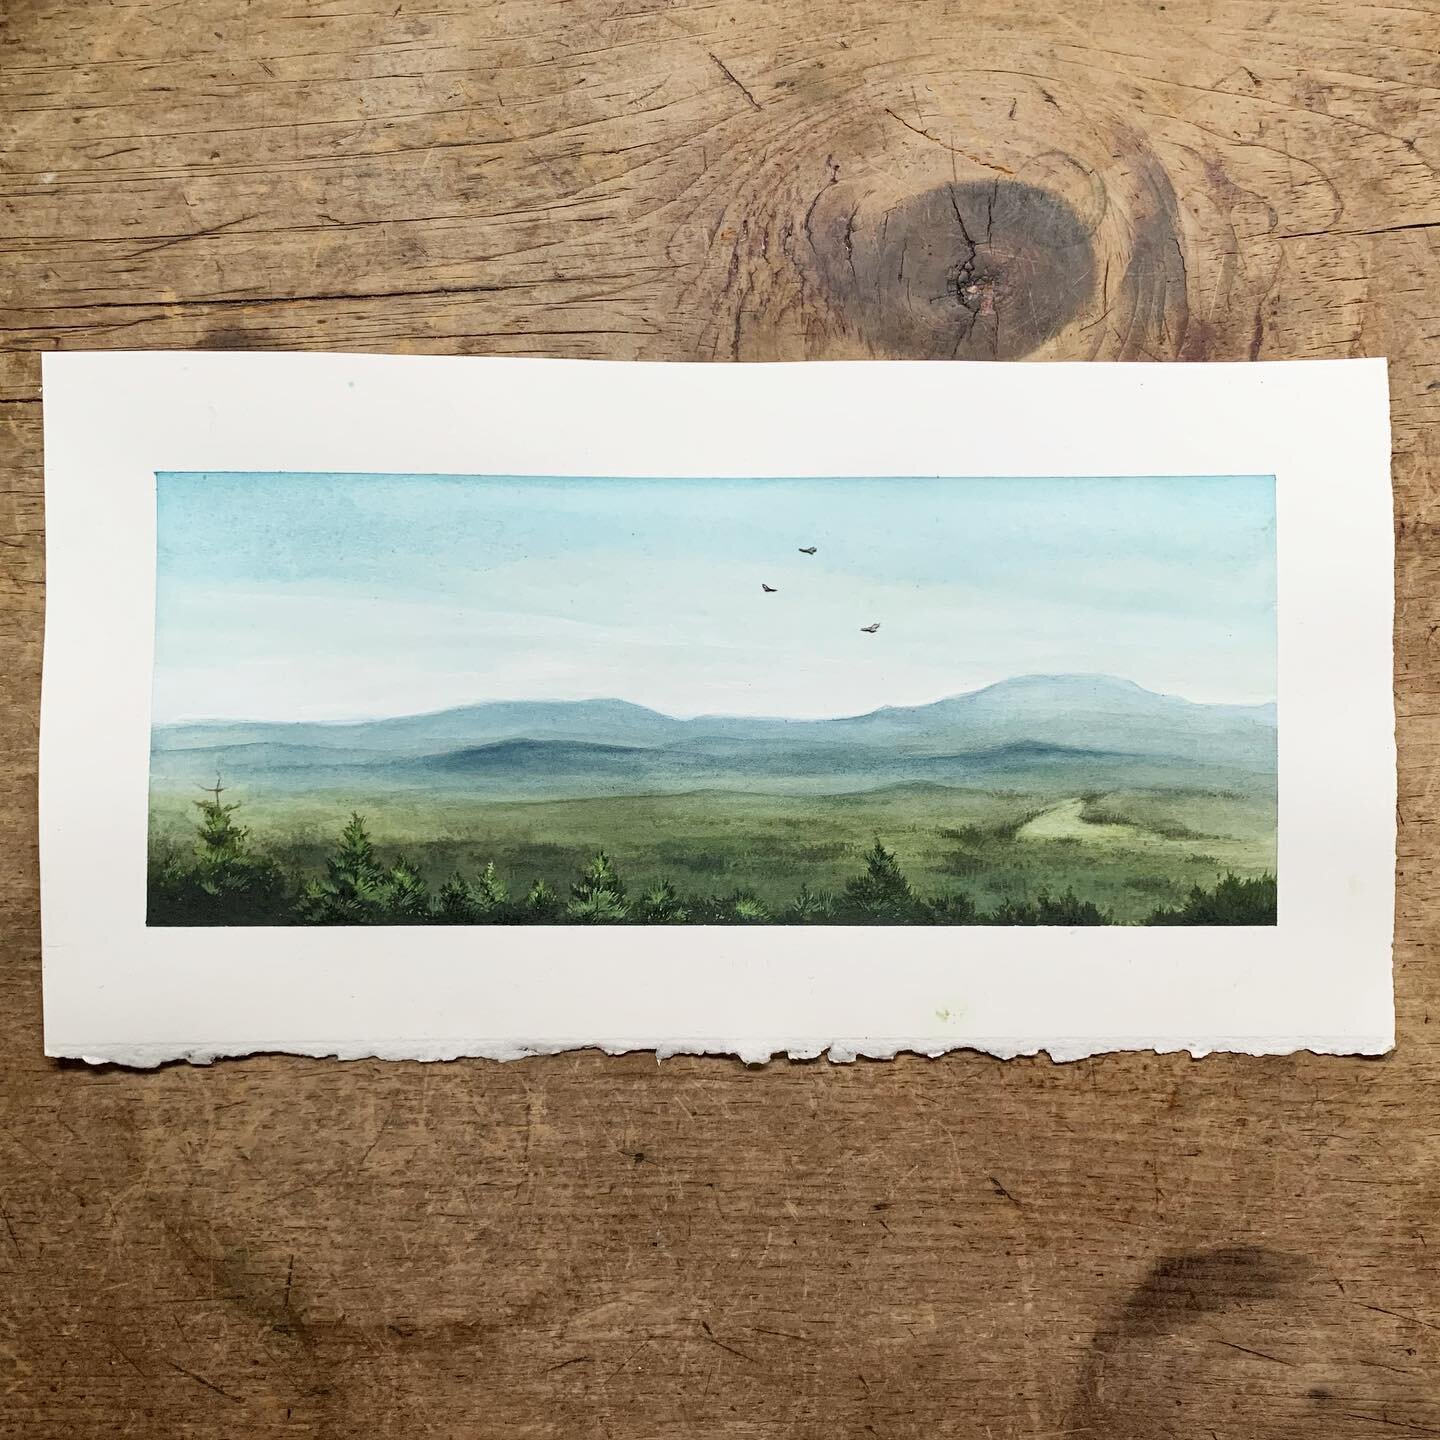 *SOLD* ❤️
Mount Agamenticus Study
watercolor on paper, with hand-cut vultures (which are also watercolor on paper)
4&rdquo;x10
$400

DM me to purchase!

Hey friends. I&rsquo;m on a bit of a mission to make my business more sustainable (i.e. move away